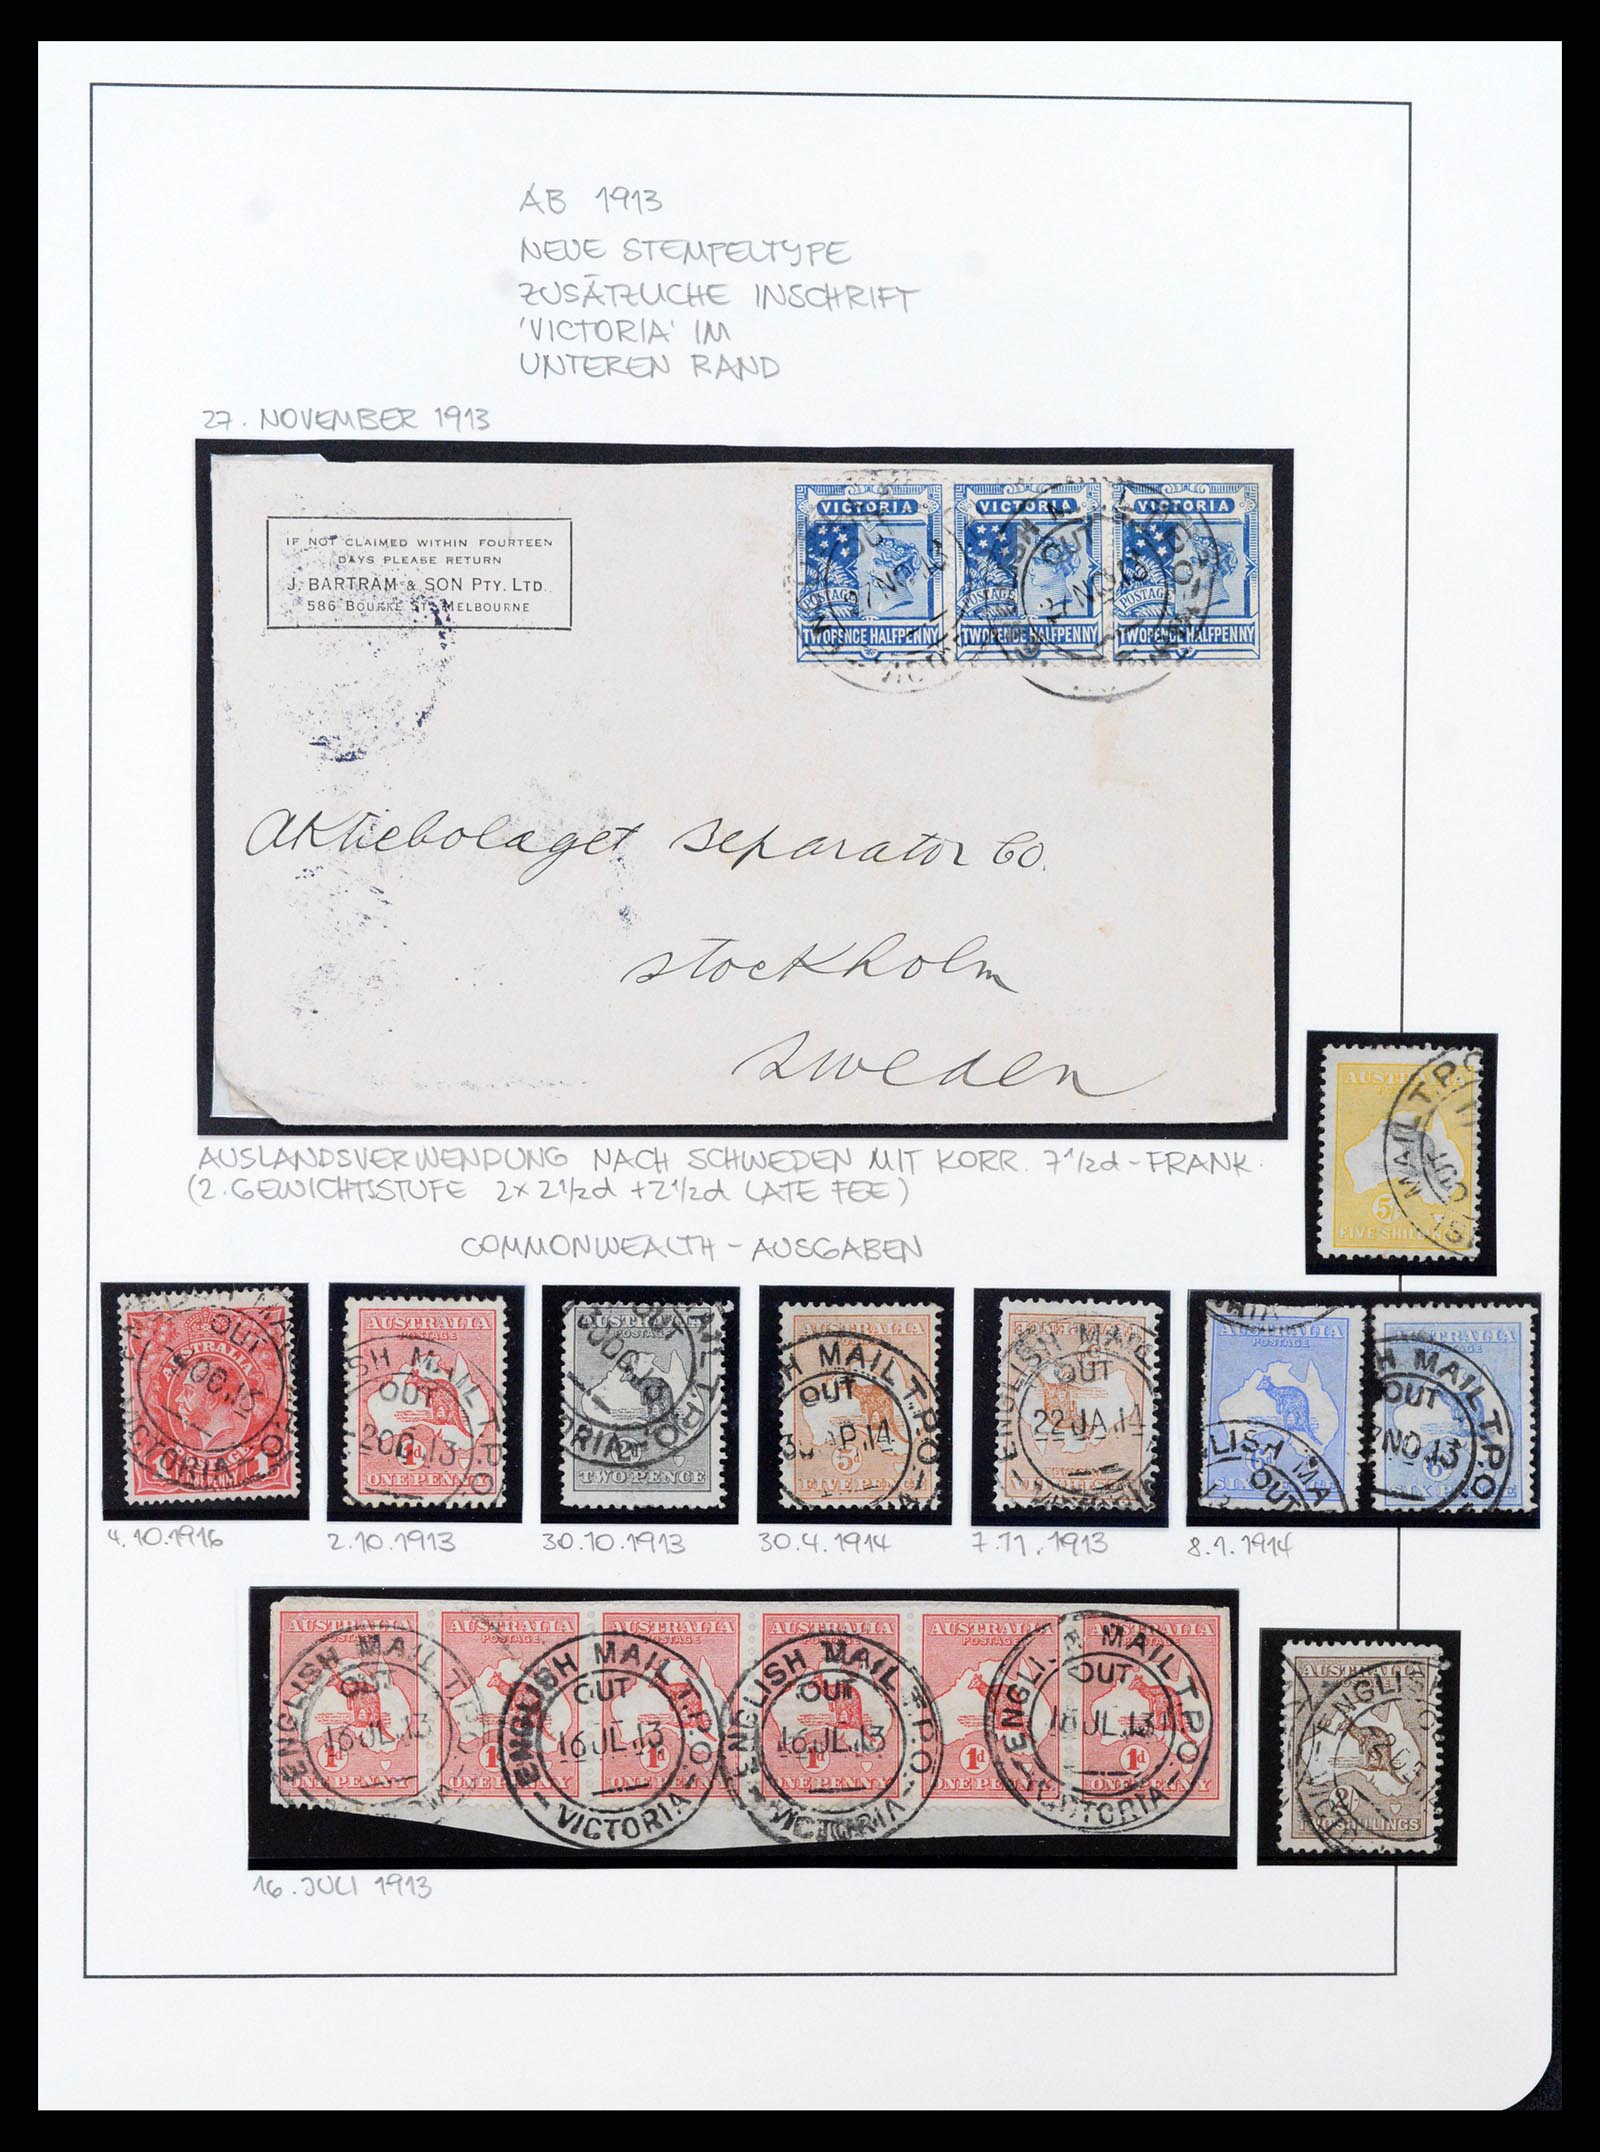 37514 027 - Stamp collection 37514 Victoria tpo cancellations 1865-1930.